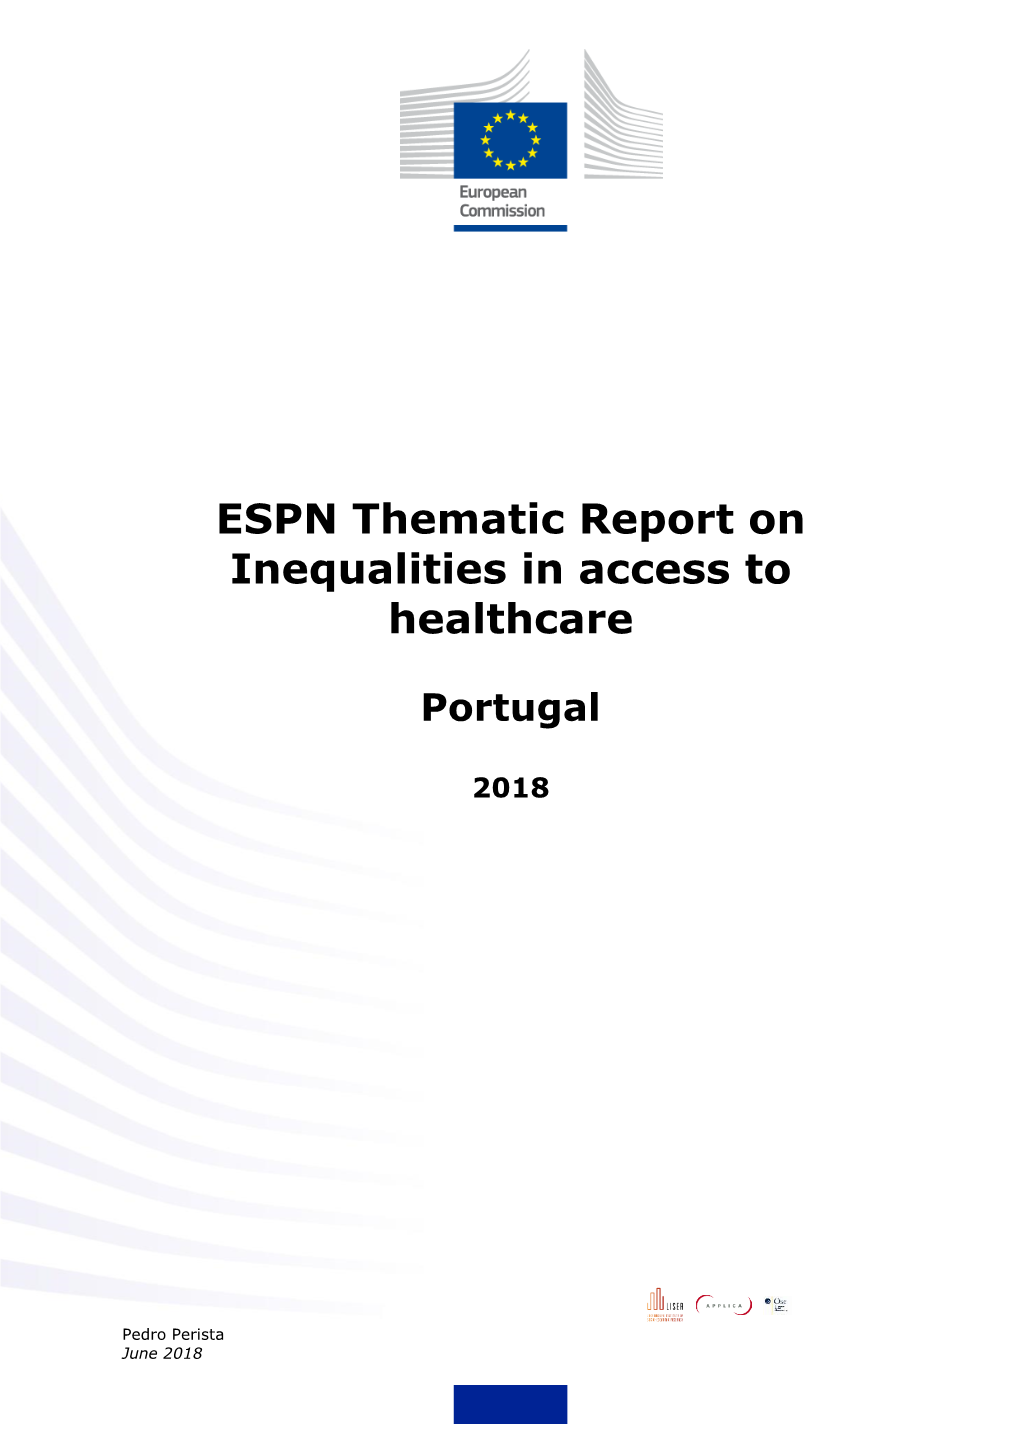 ESPN Thematic Report on Inequalities in Access to Healthcare